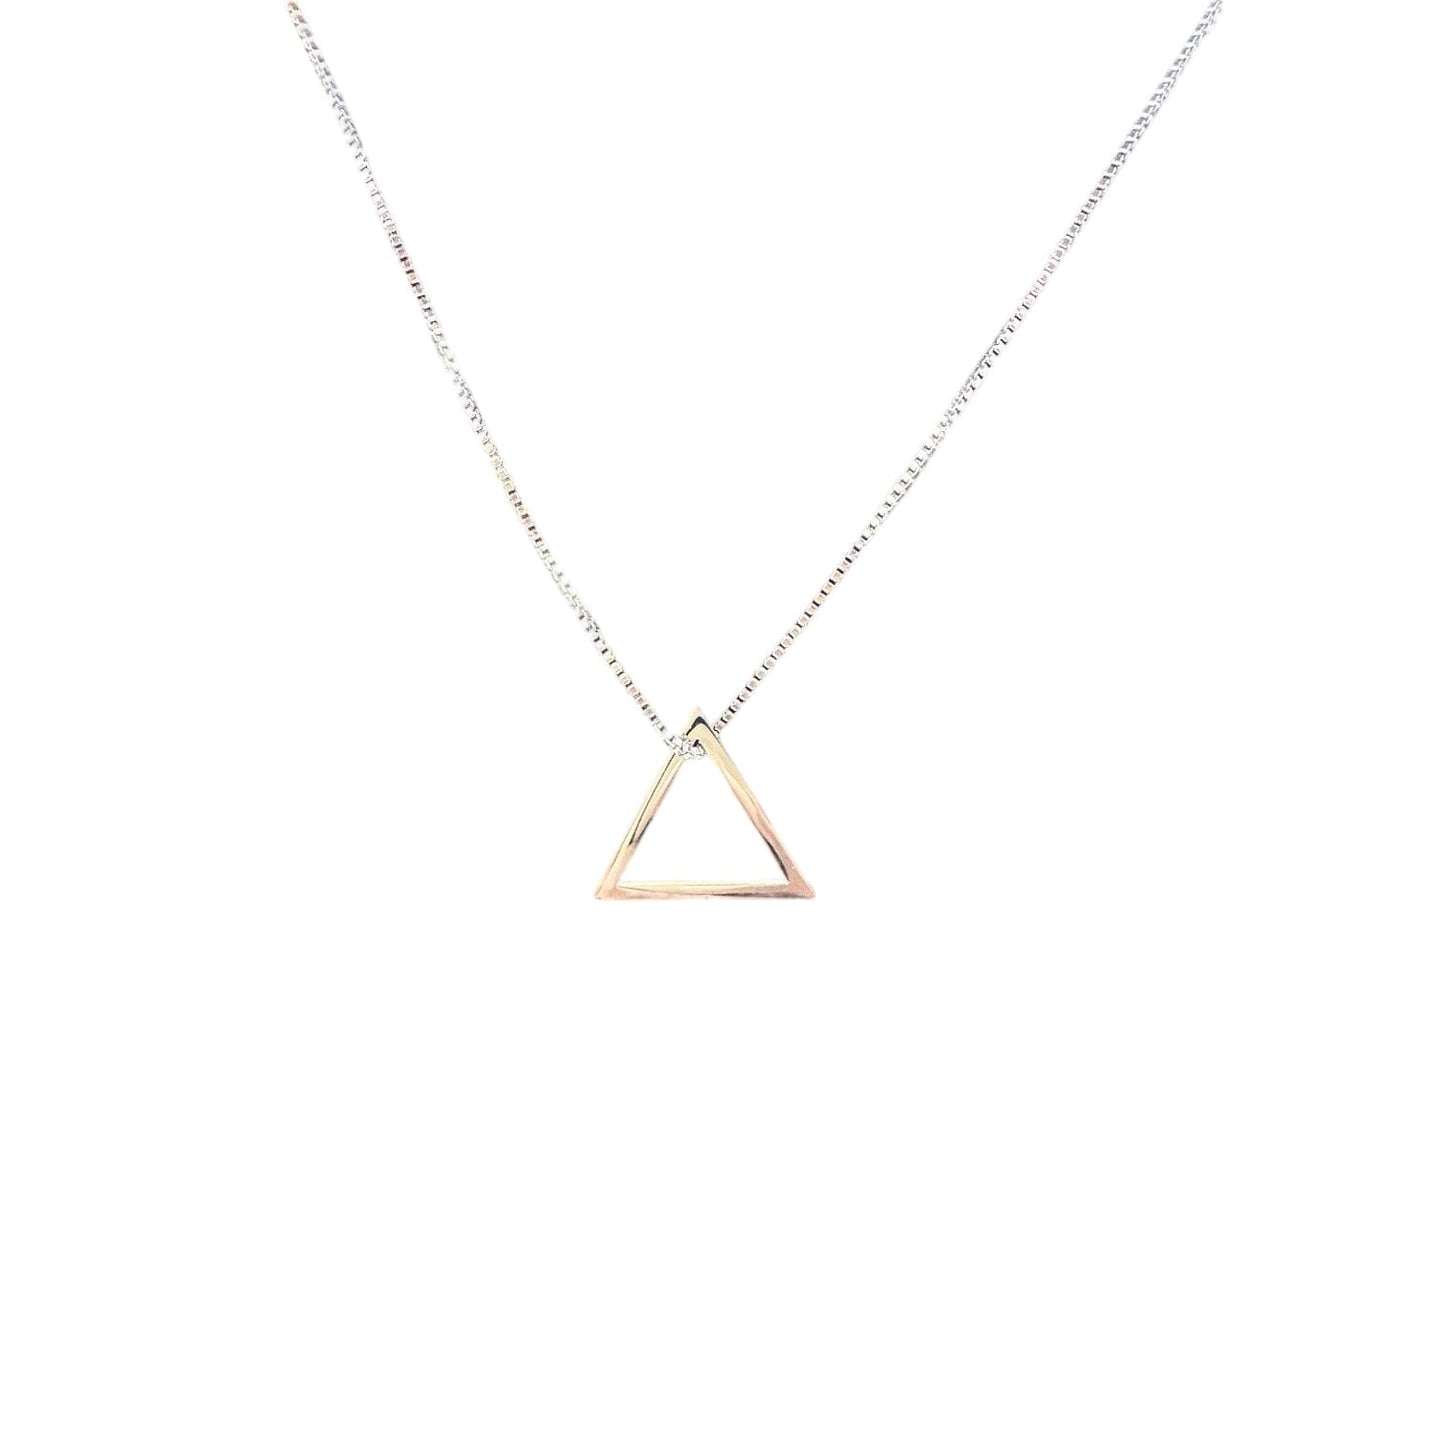 Stainless Steel Triangle Pendant Necklaces Trendzio Silver 